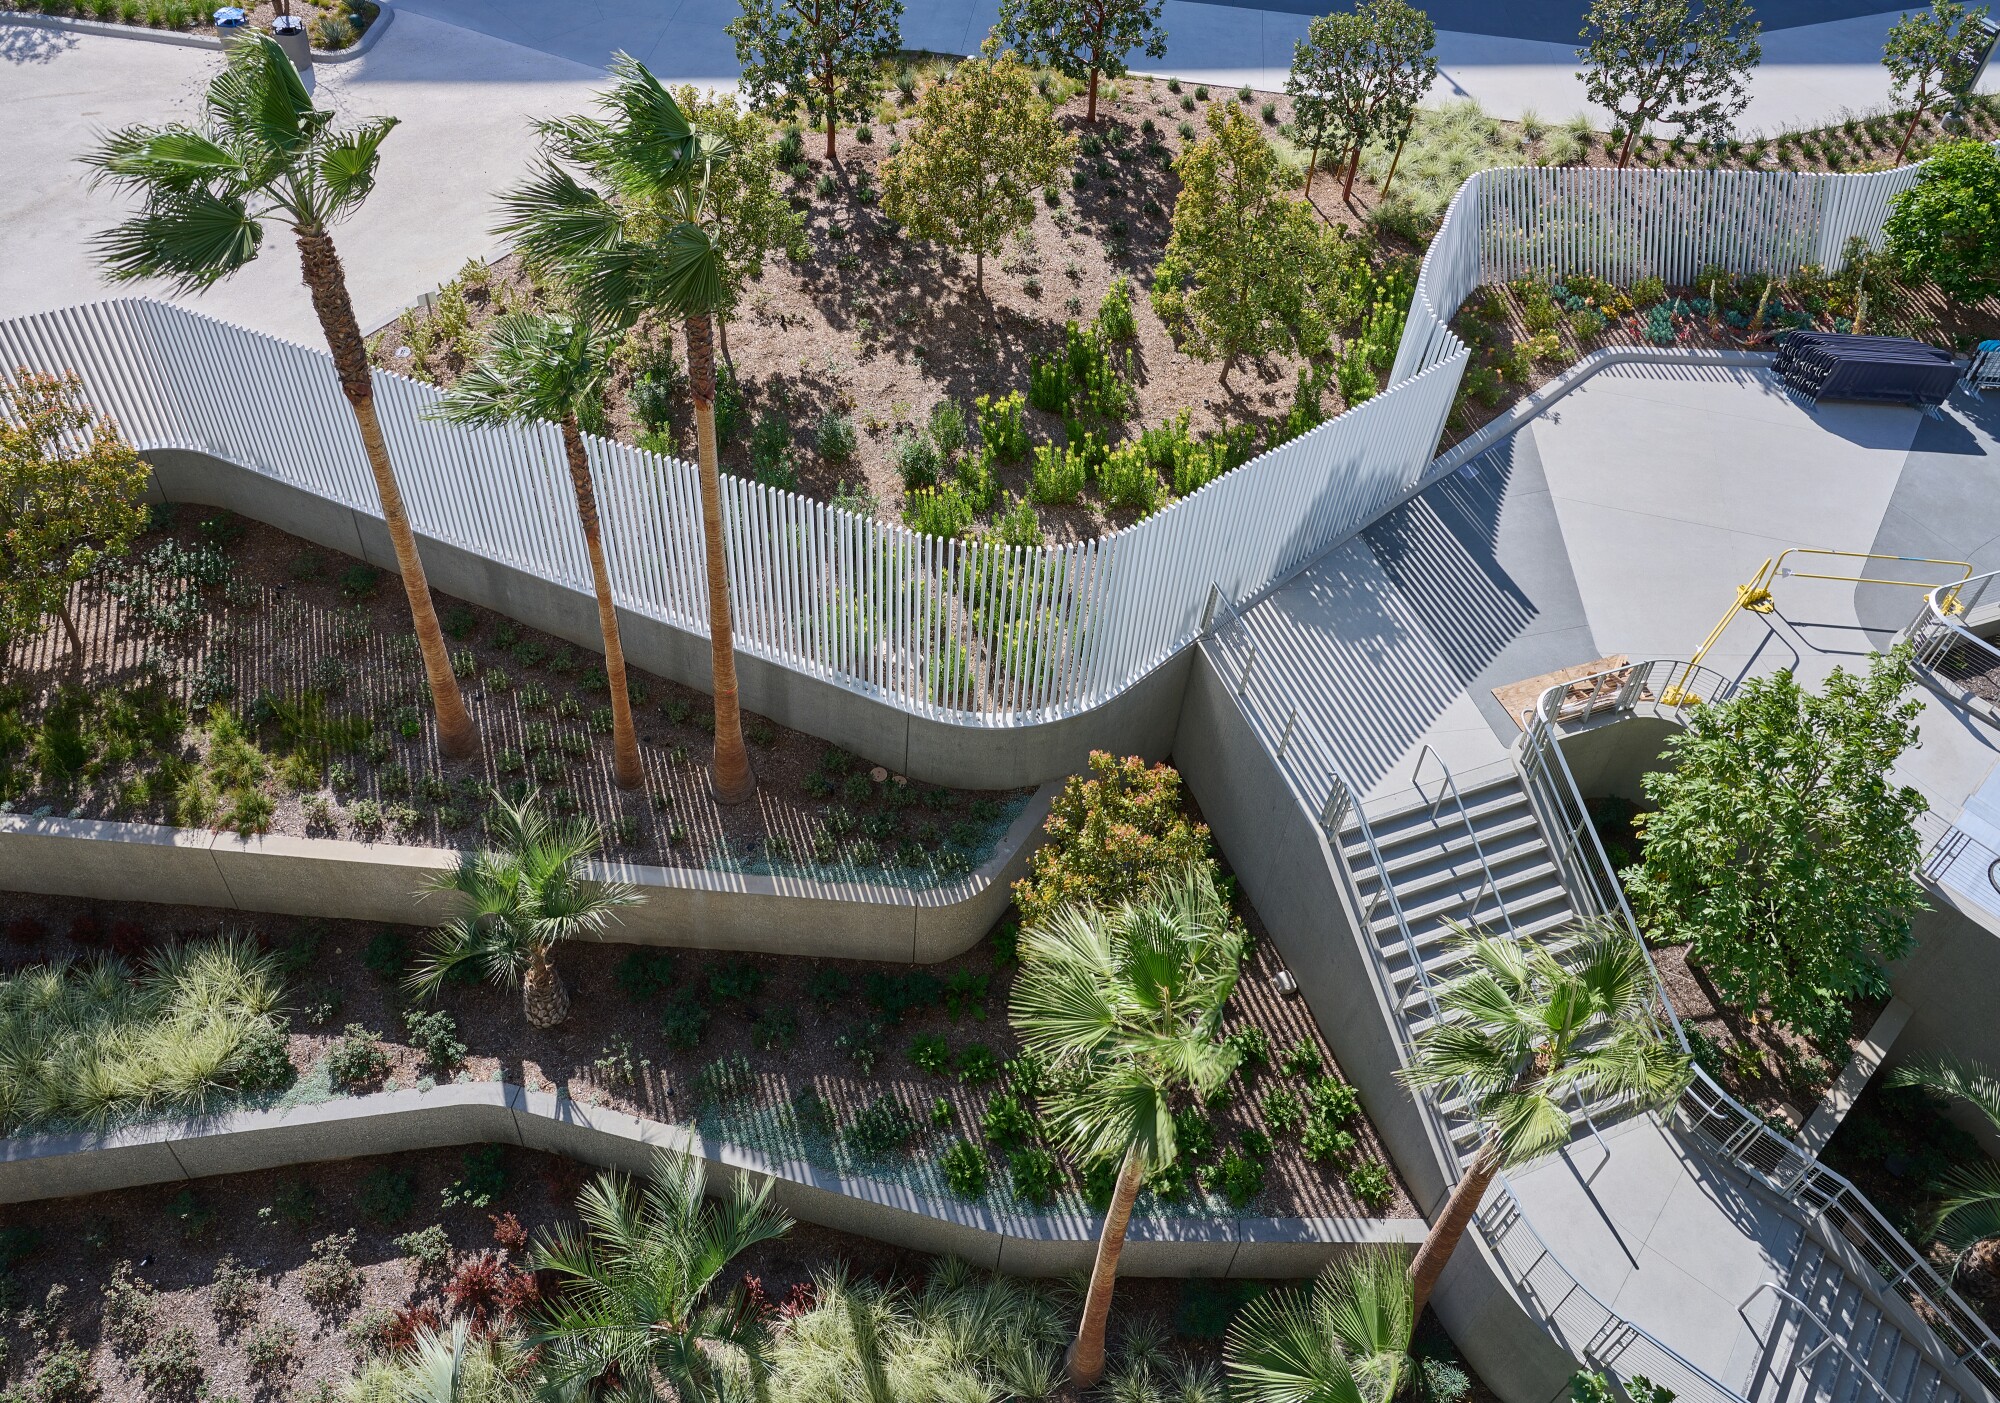 An overhead view shows zigzagging garden terraces pierced by an undulating fence and a staircase.